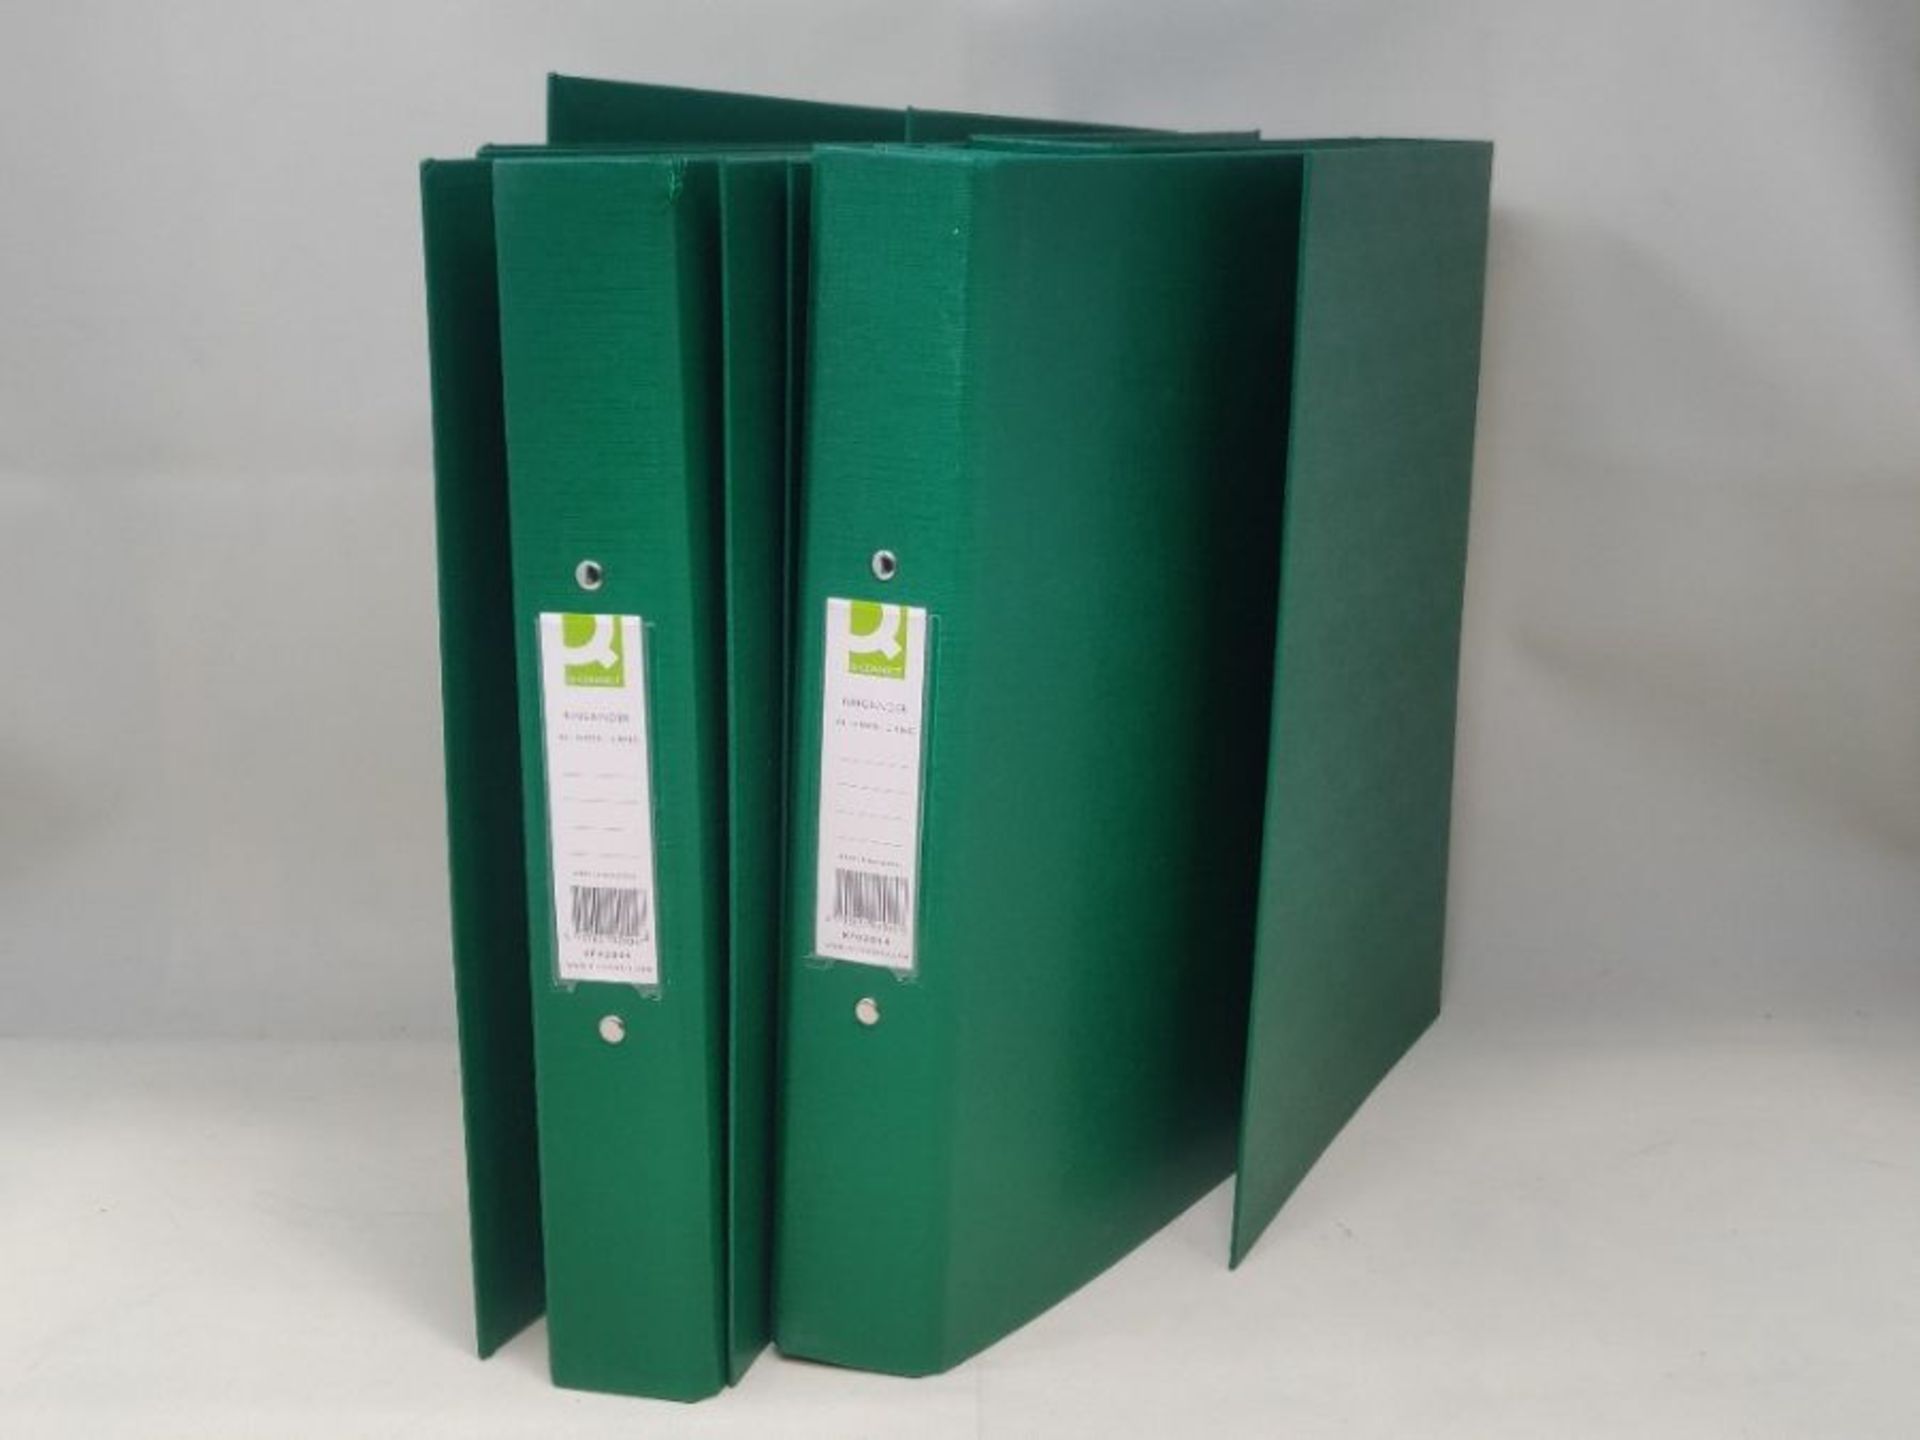 Q-Connect 2 Ring Polypropylene A4 Binder, 25 mm KF02004 - Green, Pack of 10 - Image 2 of 2